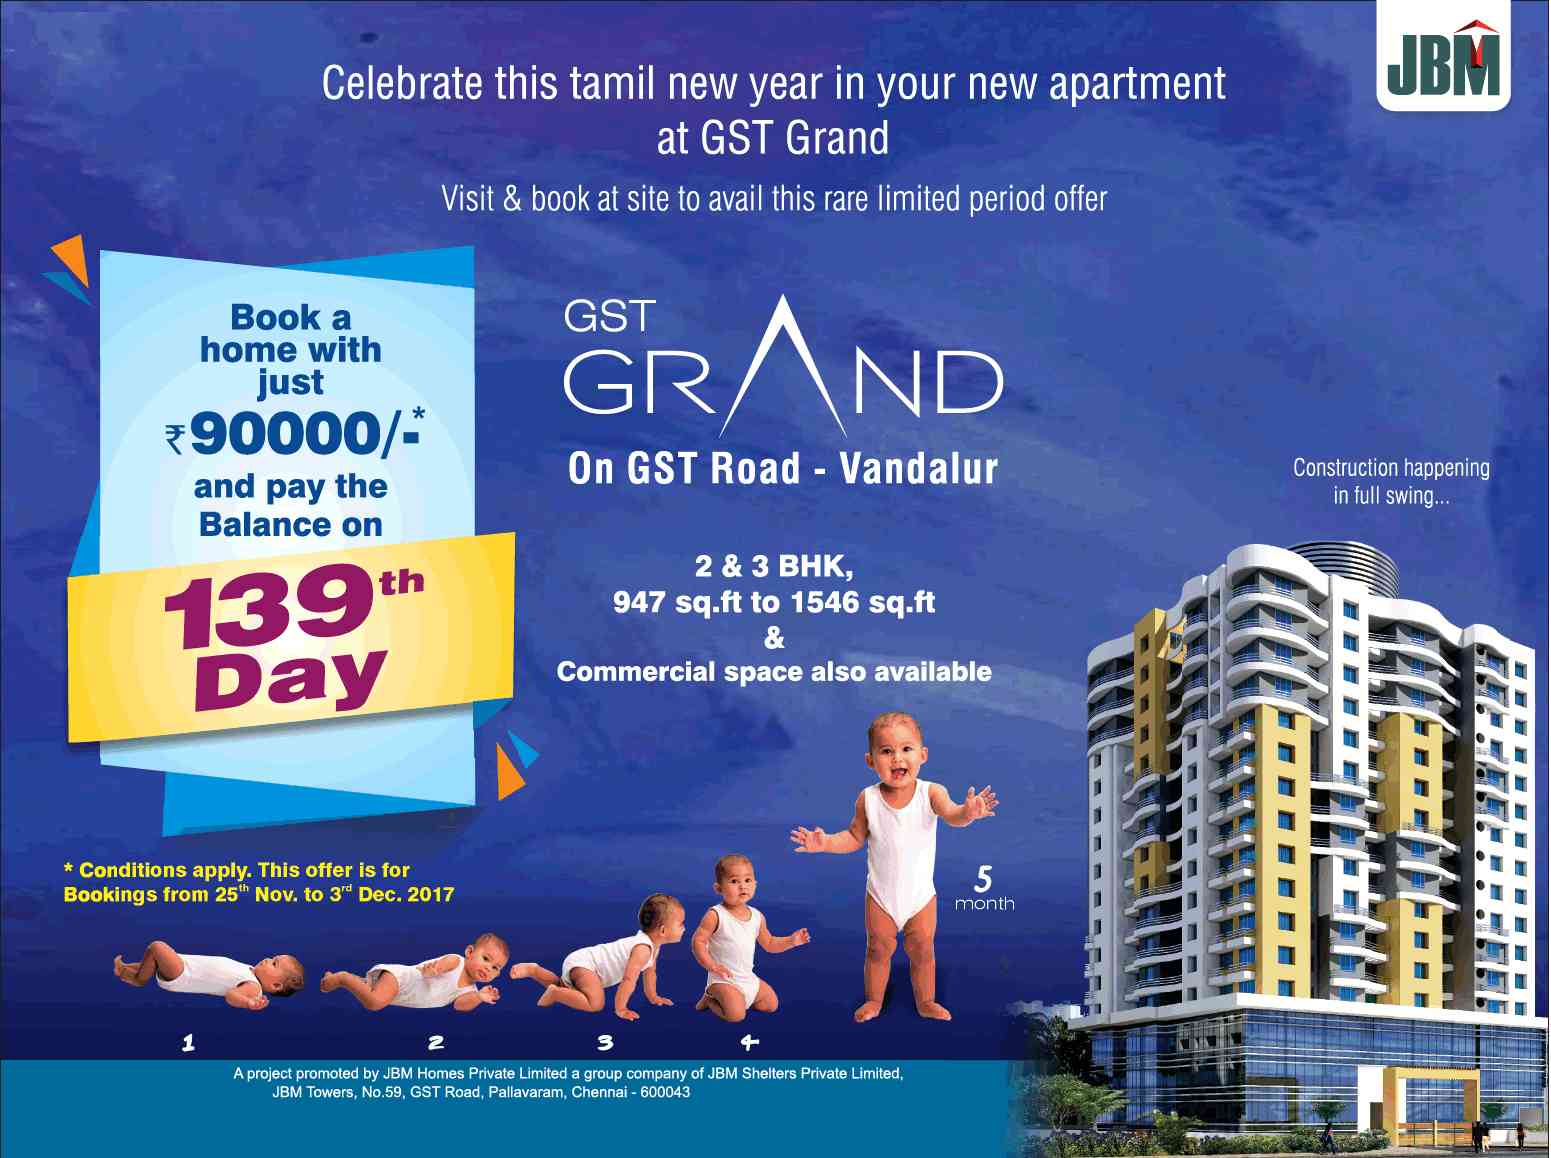 Celebrate this Tamil new year in your new apartment at JBM GST Grand in Chennai